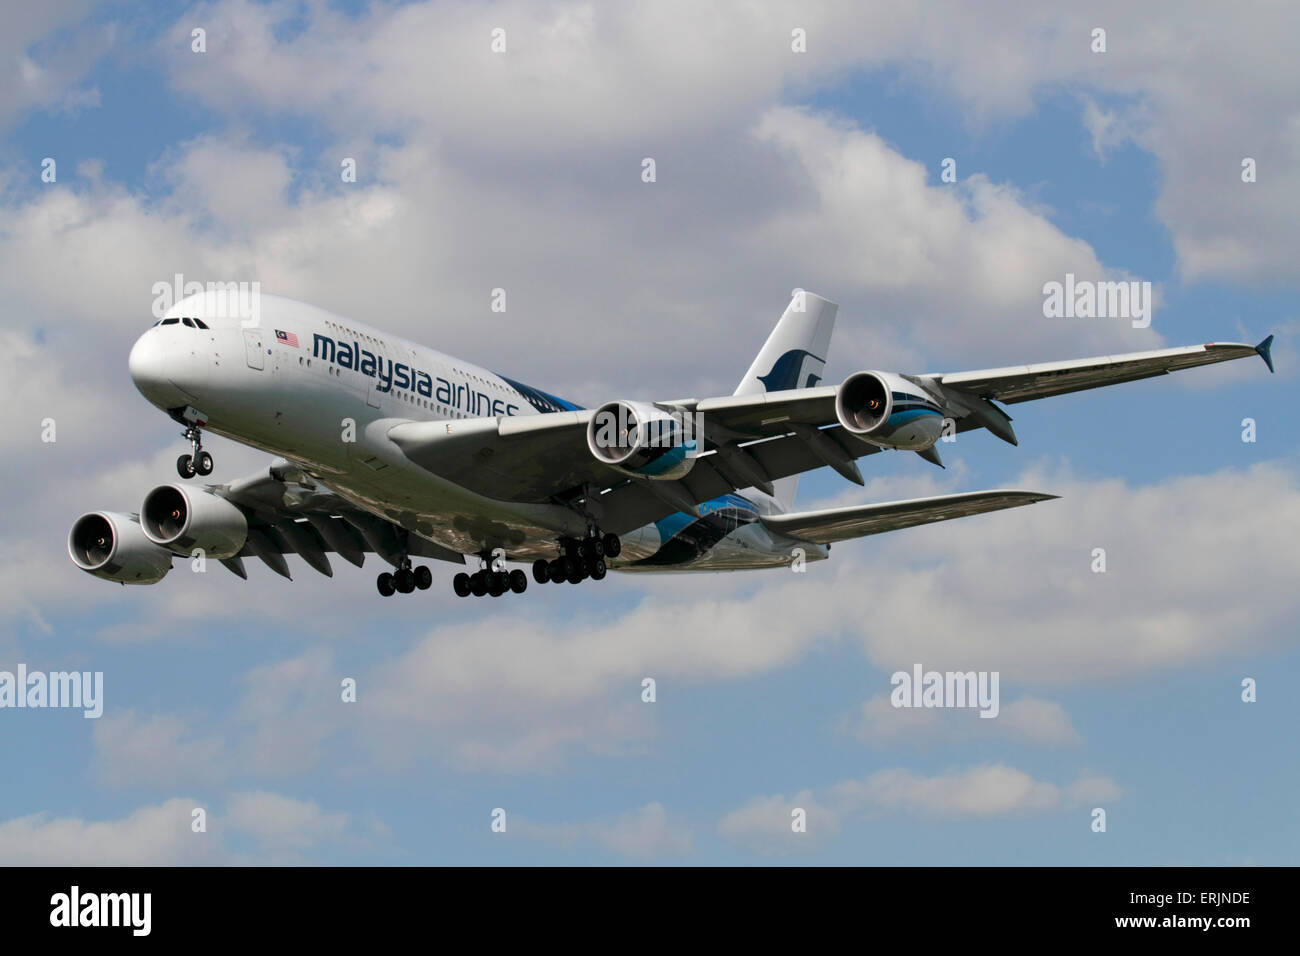 Malaysia Airlines Airbus A380 long haul jet plane, known as the superjumbo, on approach to Heathrow Airport Stock Photo